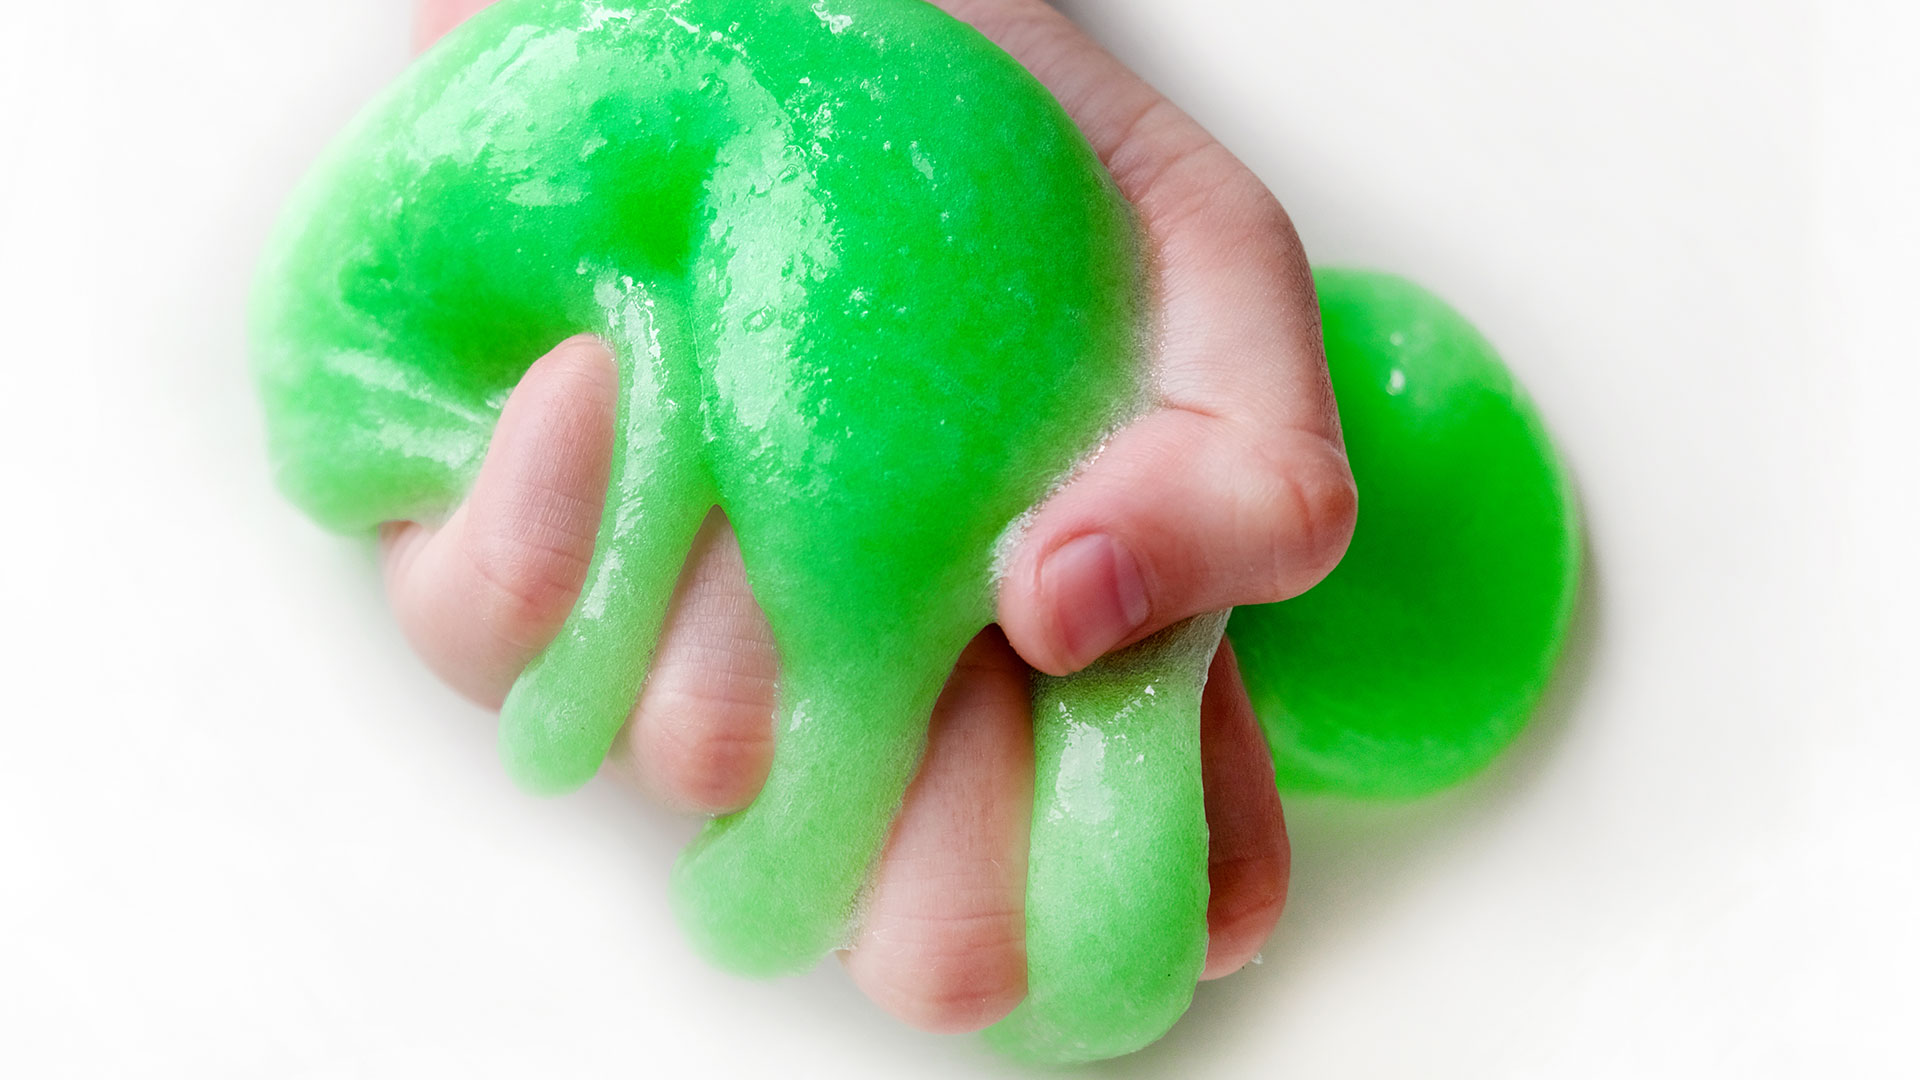 Green slime in a hand